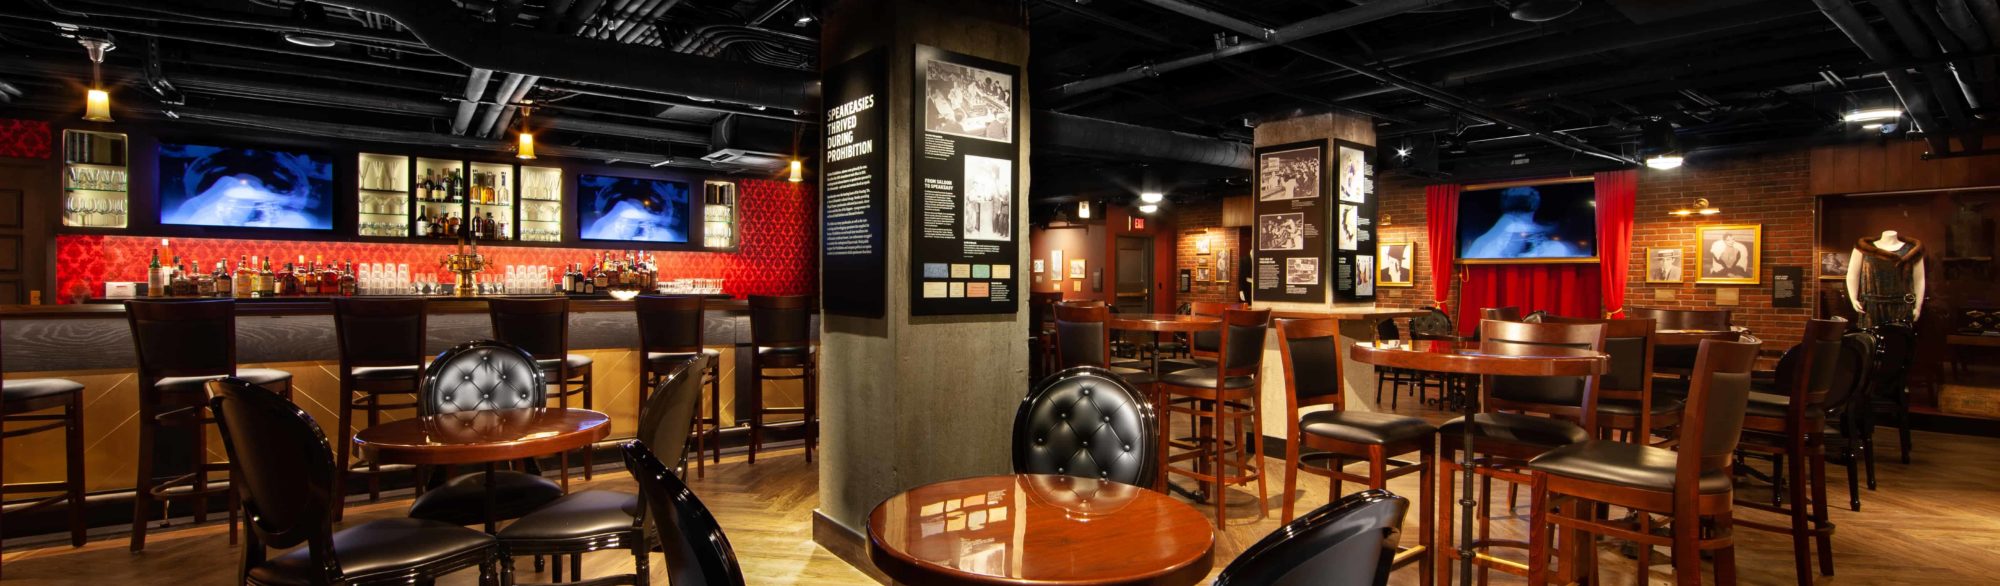 The inside of the Speakeasy and Distillery at the Mob Museum, designed by LGA Architecture.